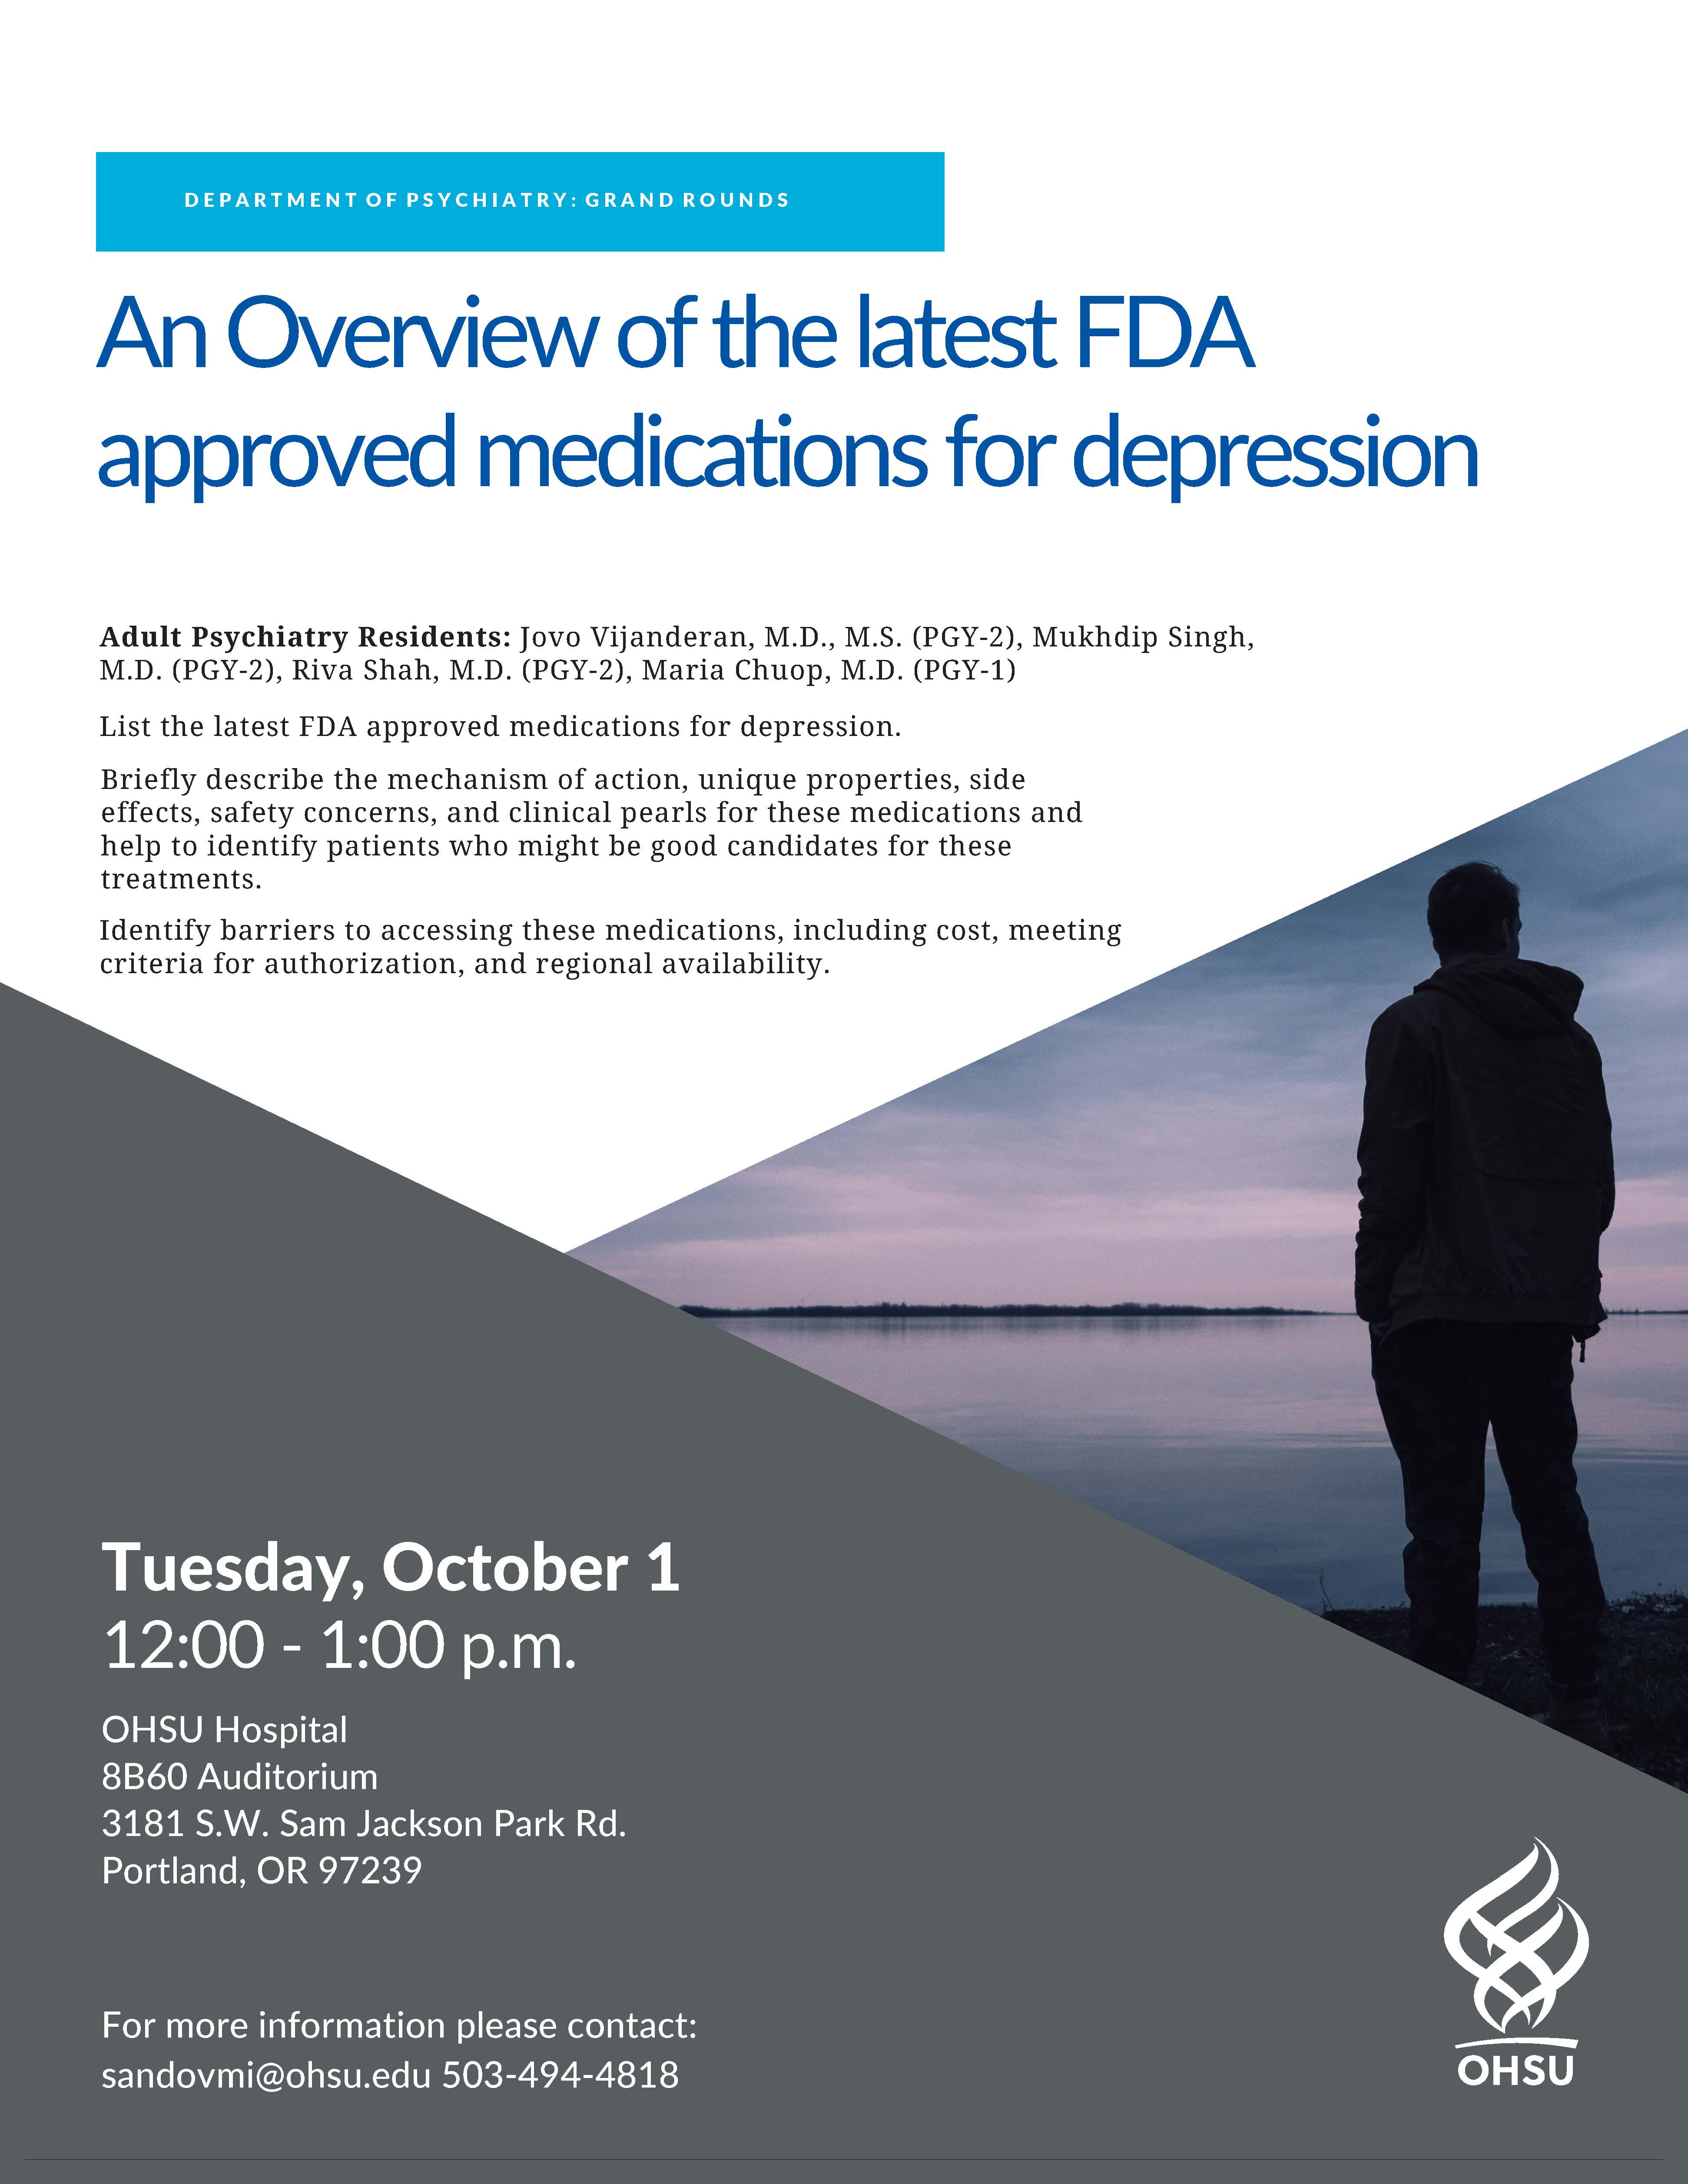 Psychiatry Grand Rounds An Overview of the latest FDA approved